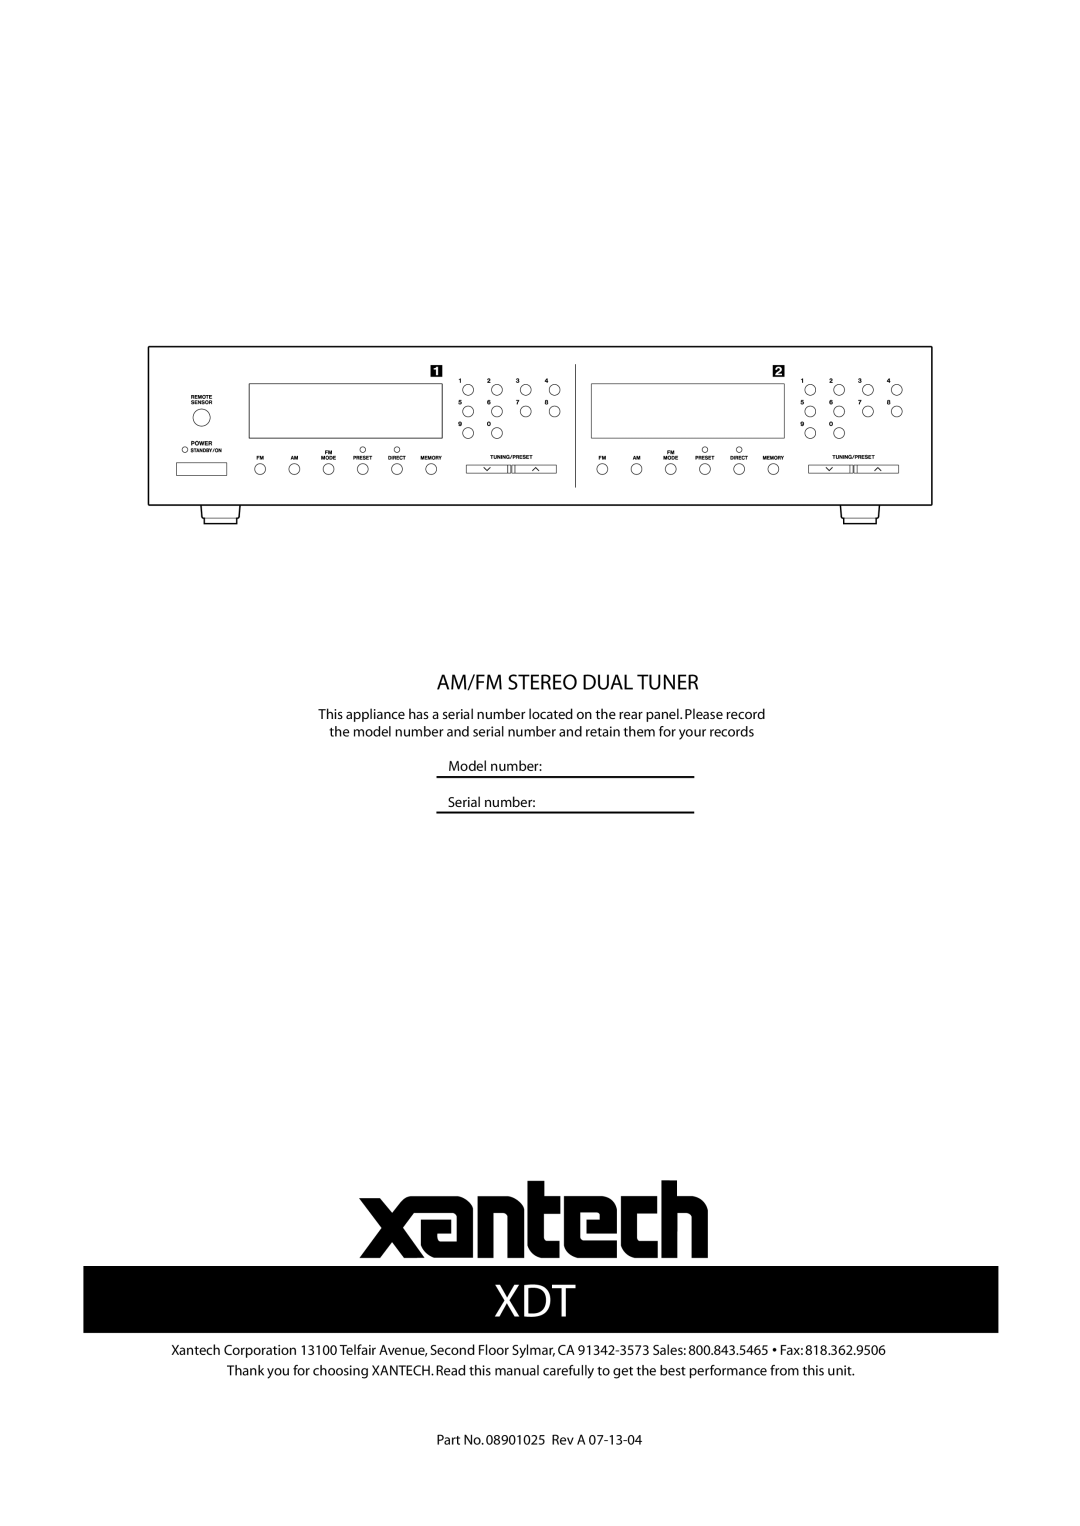 Xantech AM/FM Radio Tuner owner manual Am/Fm Stereo Dual Tuner, Model number Serial number, Part No. 08901025 Rev A 